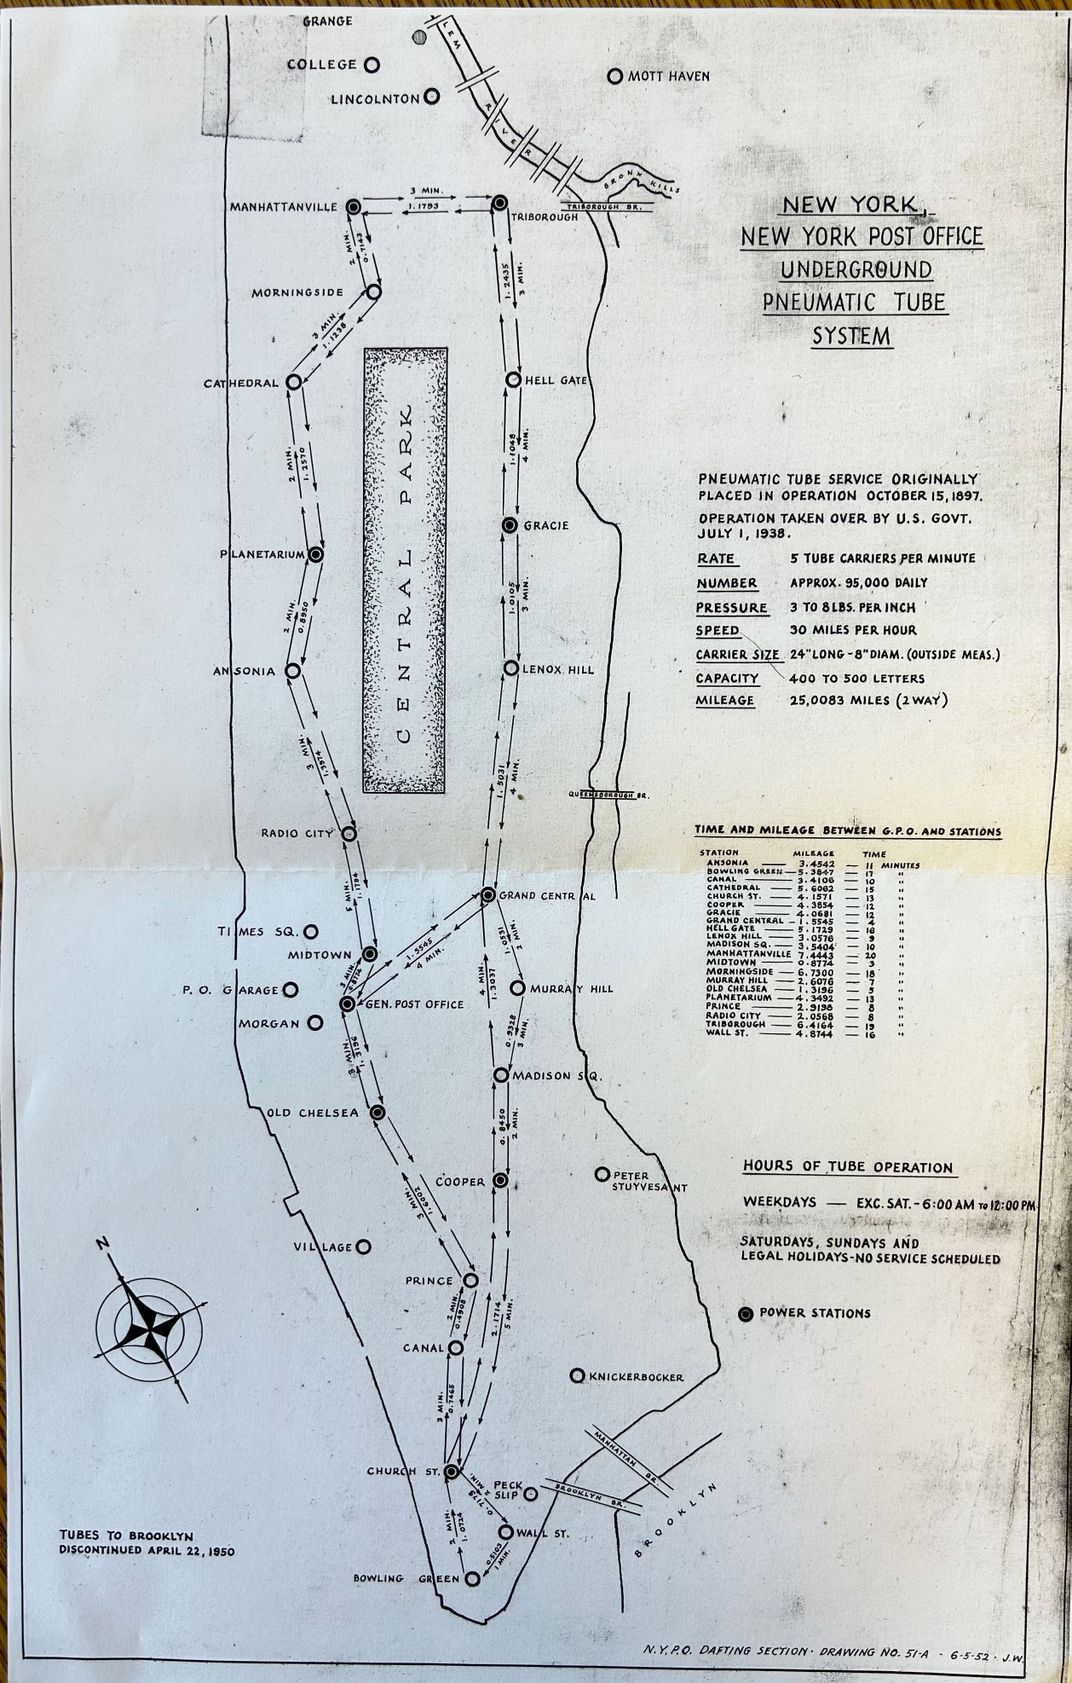 A 1952 map of New York's pneumatic tube mail system